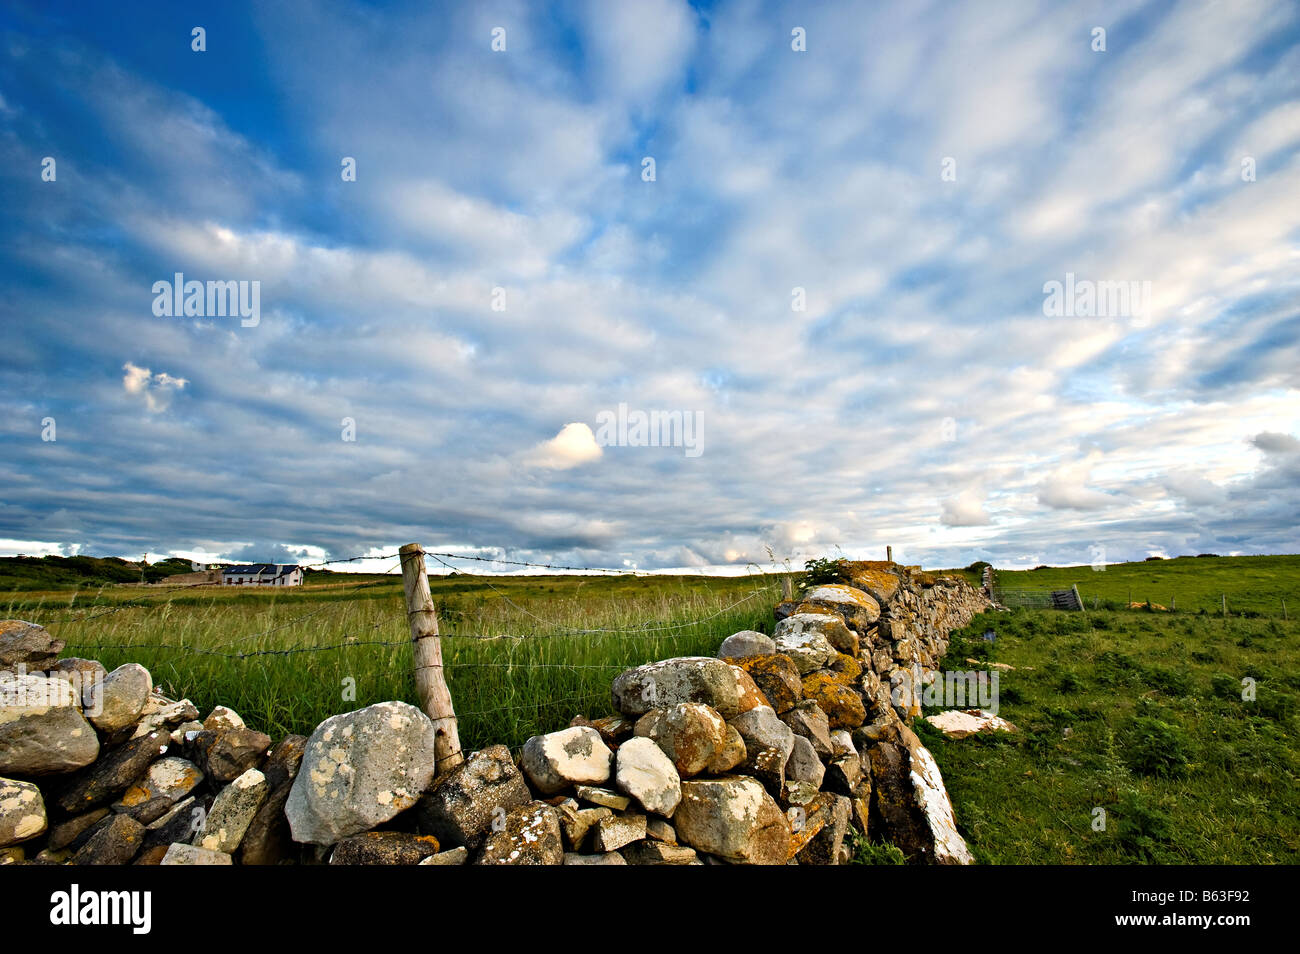 rural scene from Co.Sligo, Ireland shows stone wall topped with barbed wire fence Stock Photo